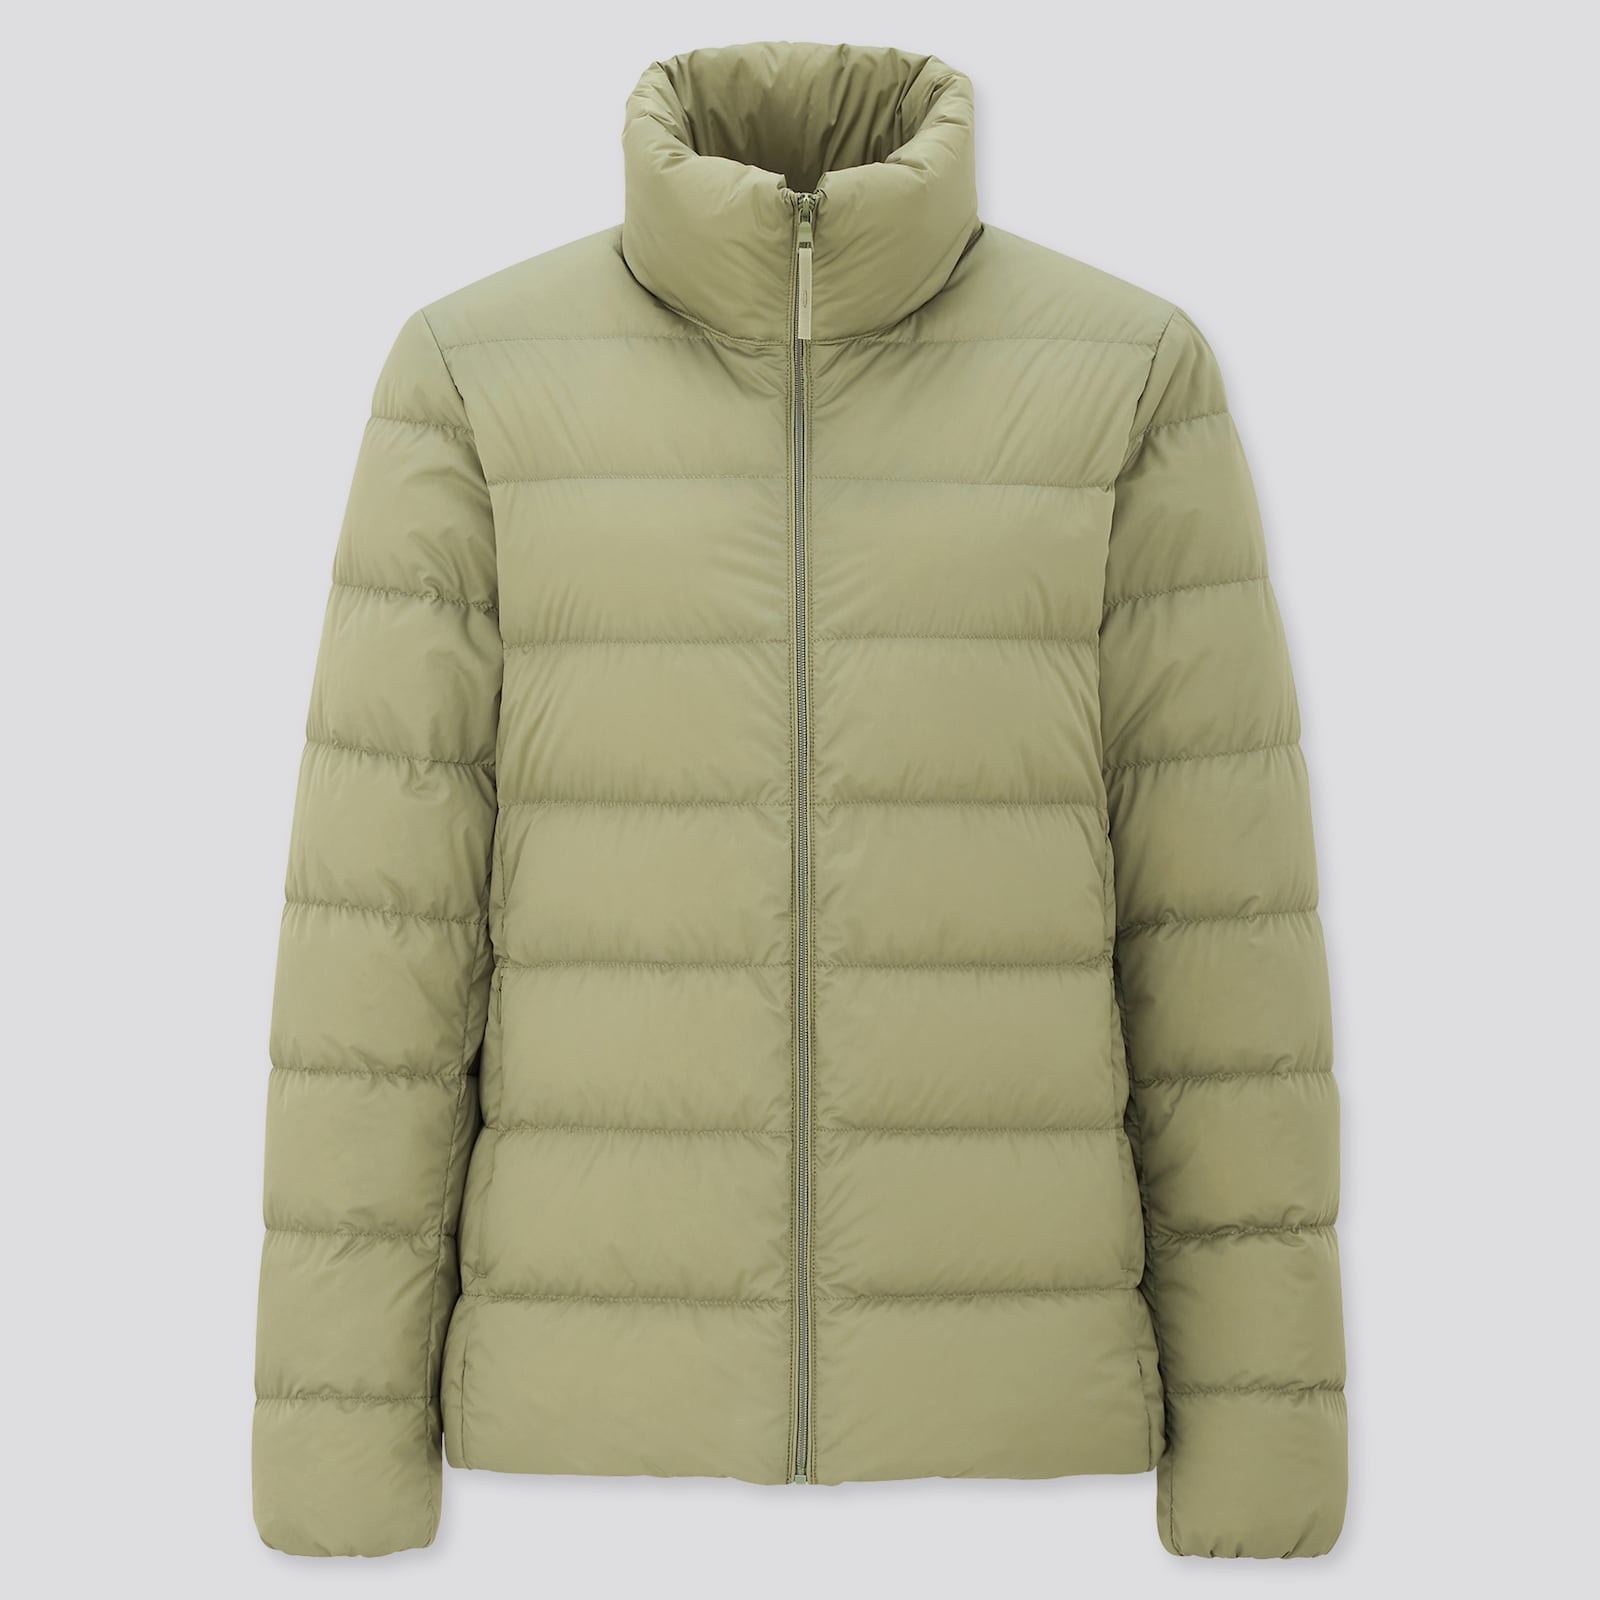 Uniqlo Ultra Light Down Jacket Review Pack Hacker | peacecommission ...